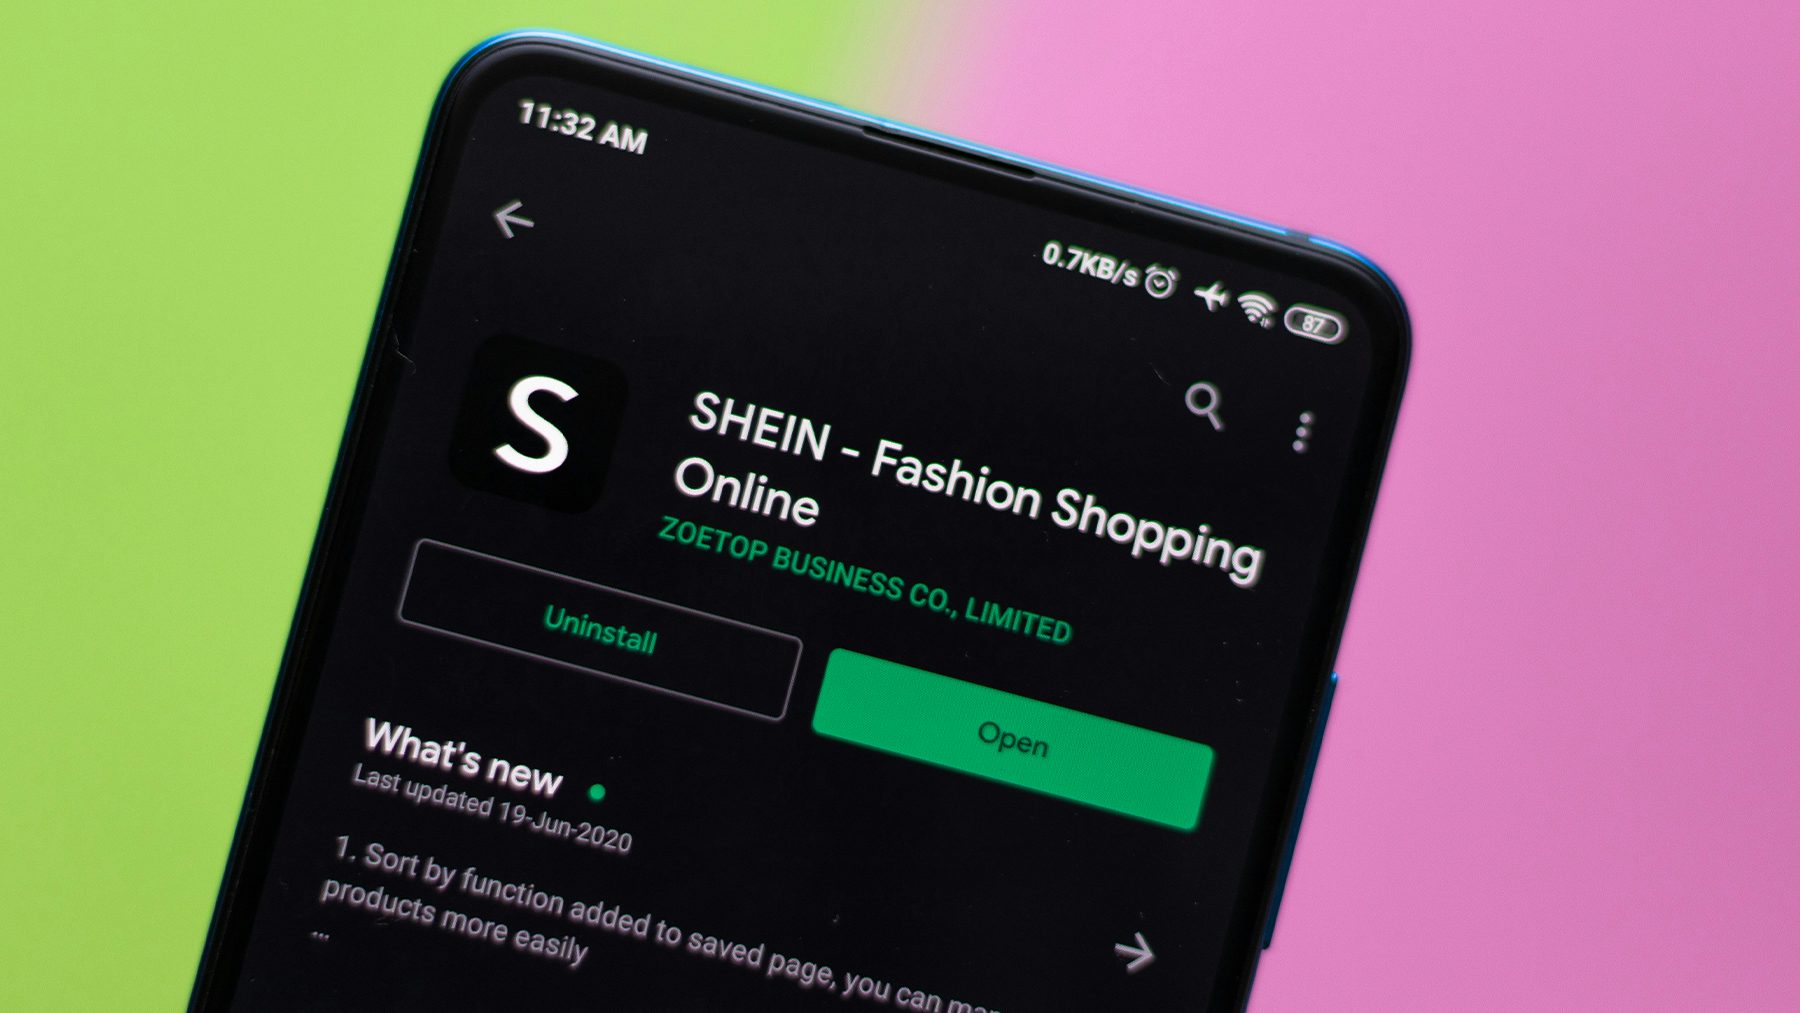 Chinese ultra-fast fashion giant Shein is facing headwinds in some markets after explosive growth in the US this year. Shutterstock.